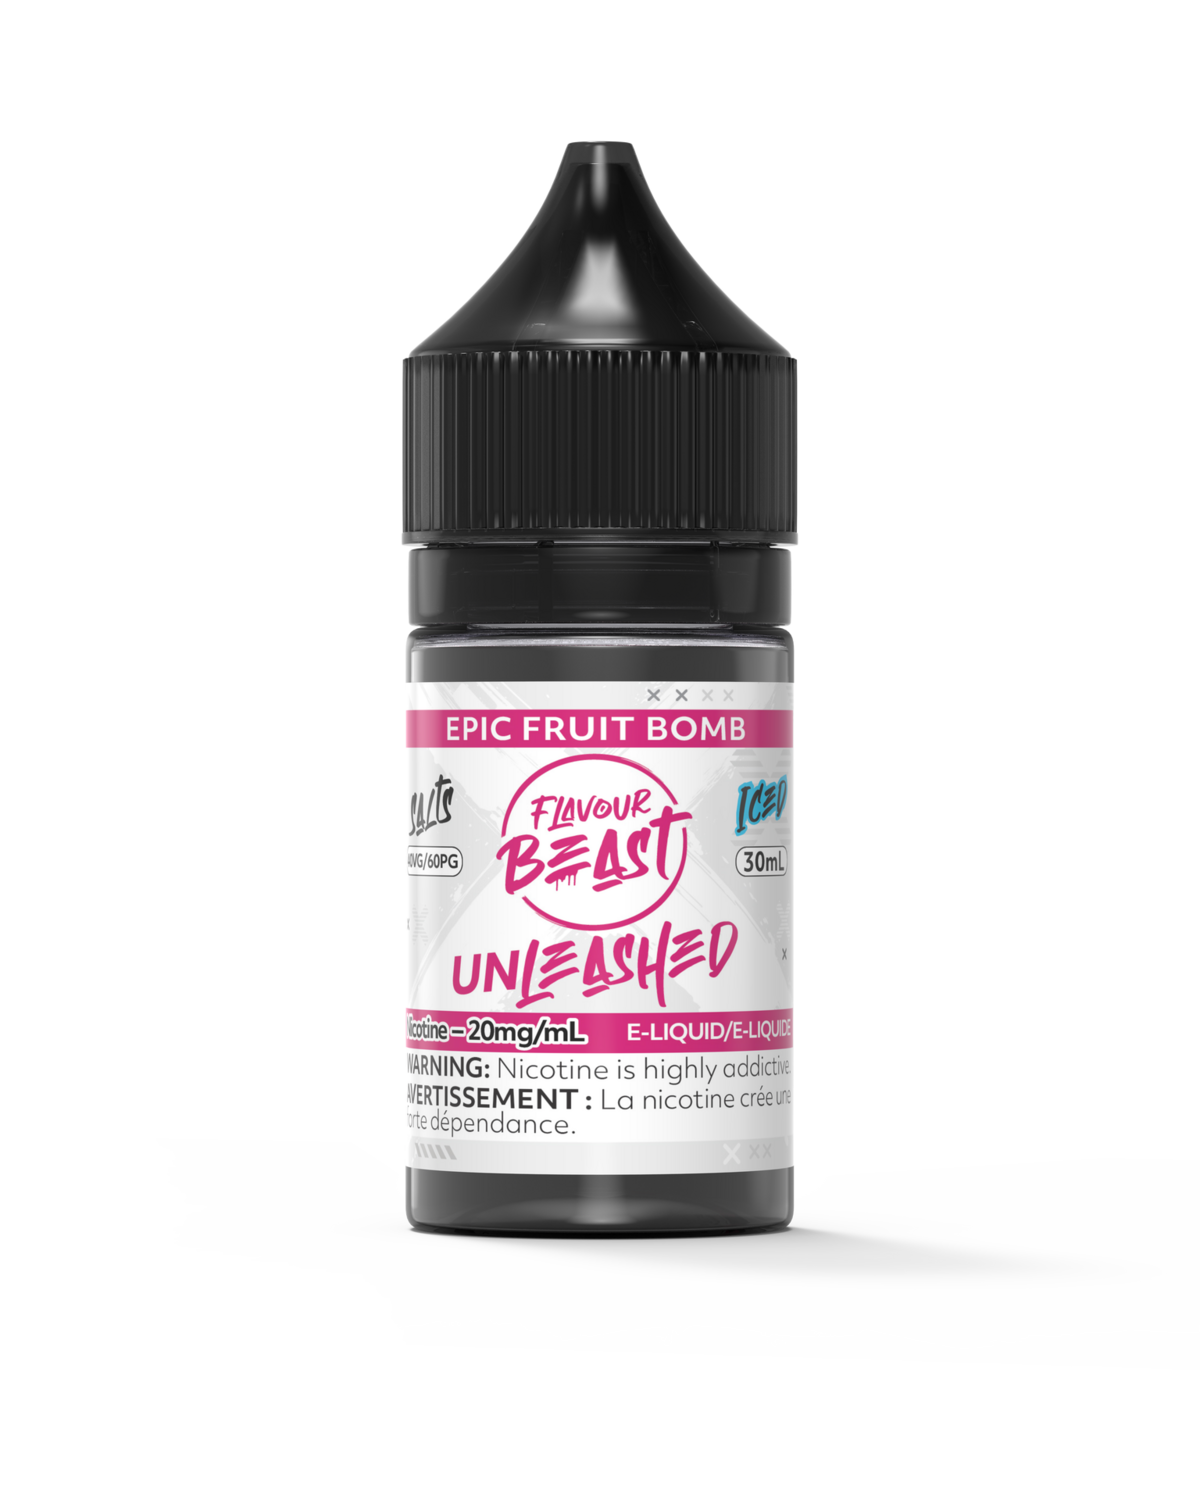 Epic Fruit Bomb by Flavour Beast Unleashed Salt, Size: 30ml, Nicotine: 20mg